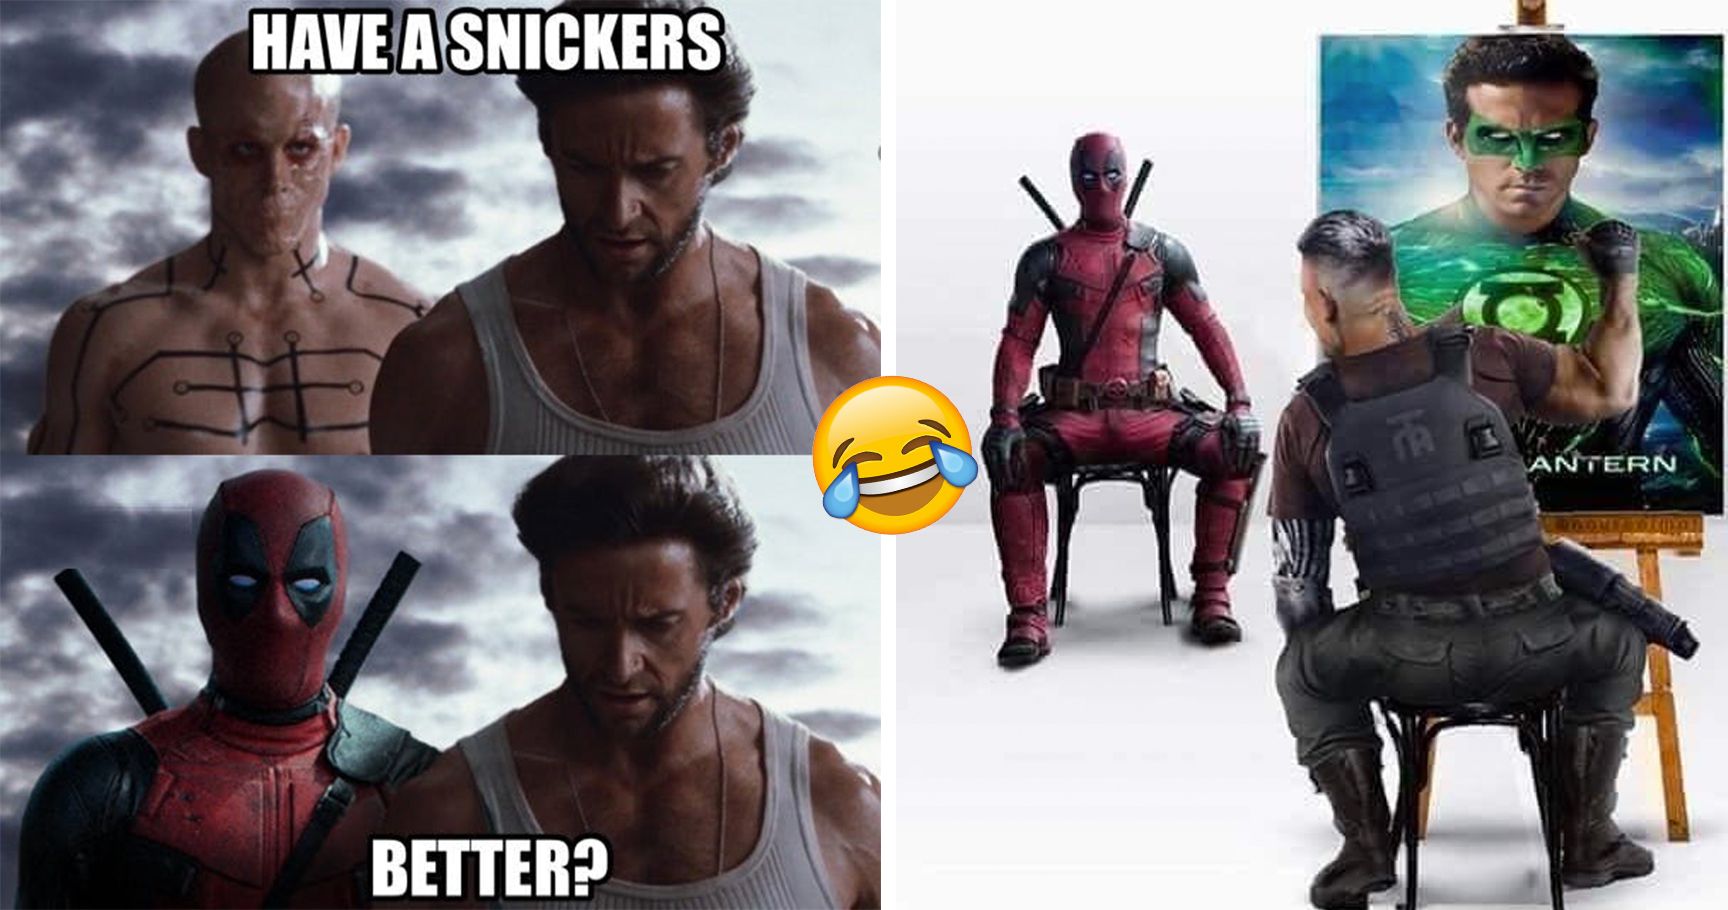 15 Deadpool Memes More Satisfying Than When He Breaks The Fourth Wall